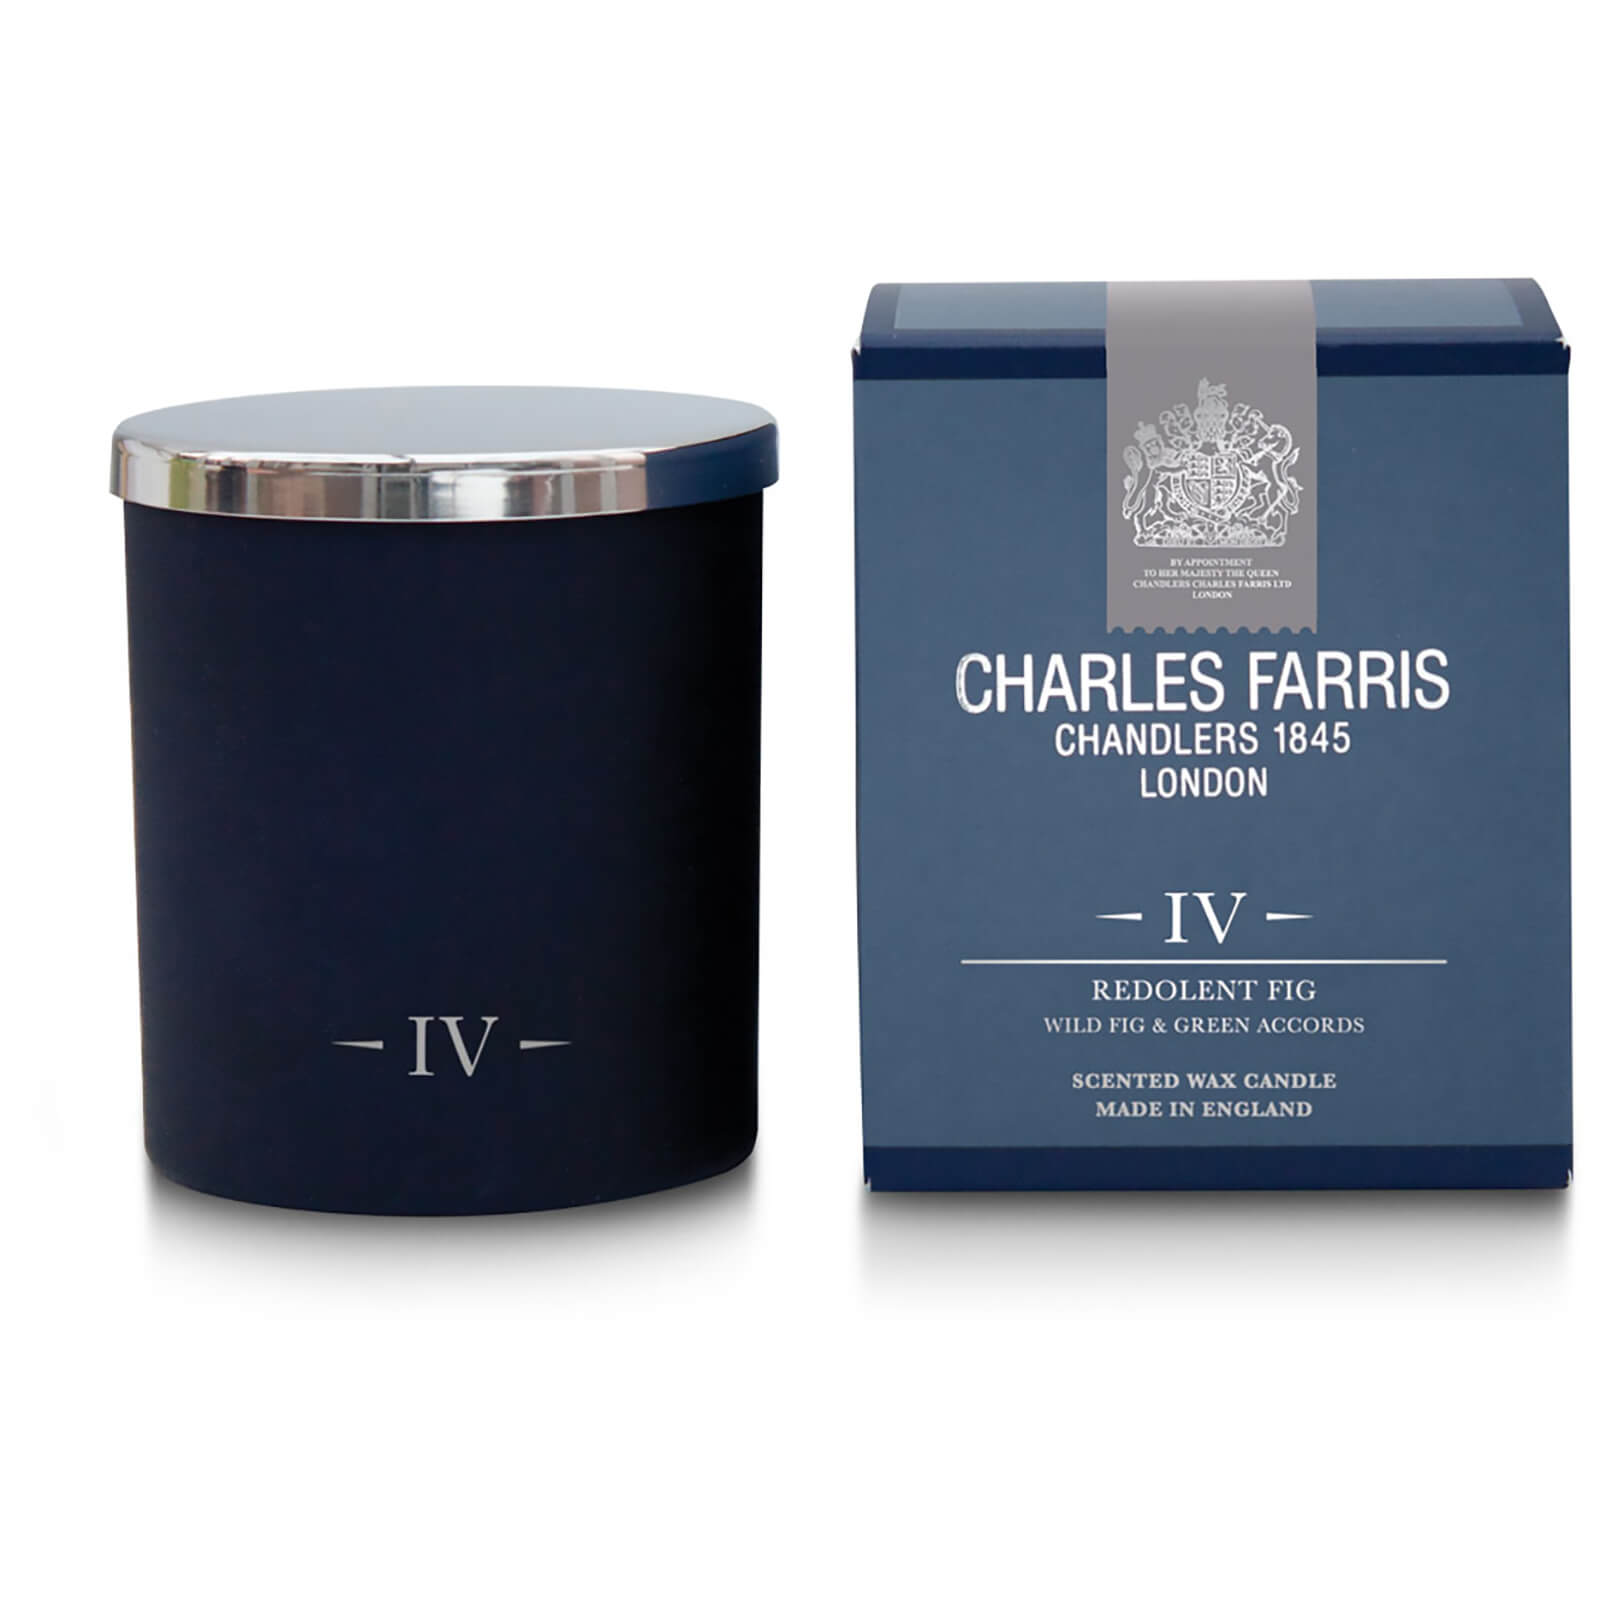 Charles Farris Signature Redolent Fig Candle 210g